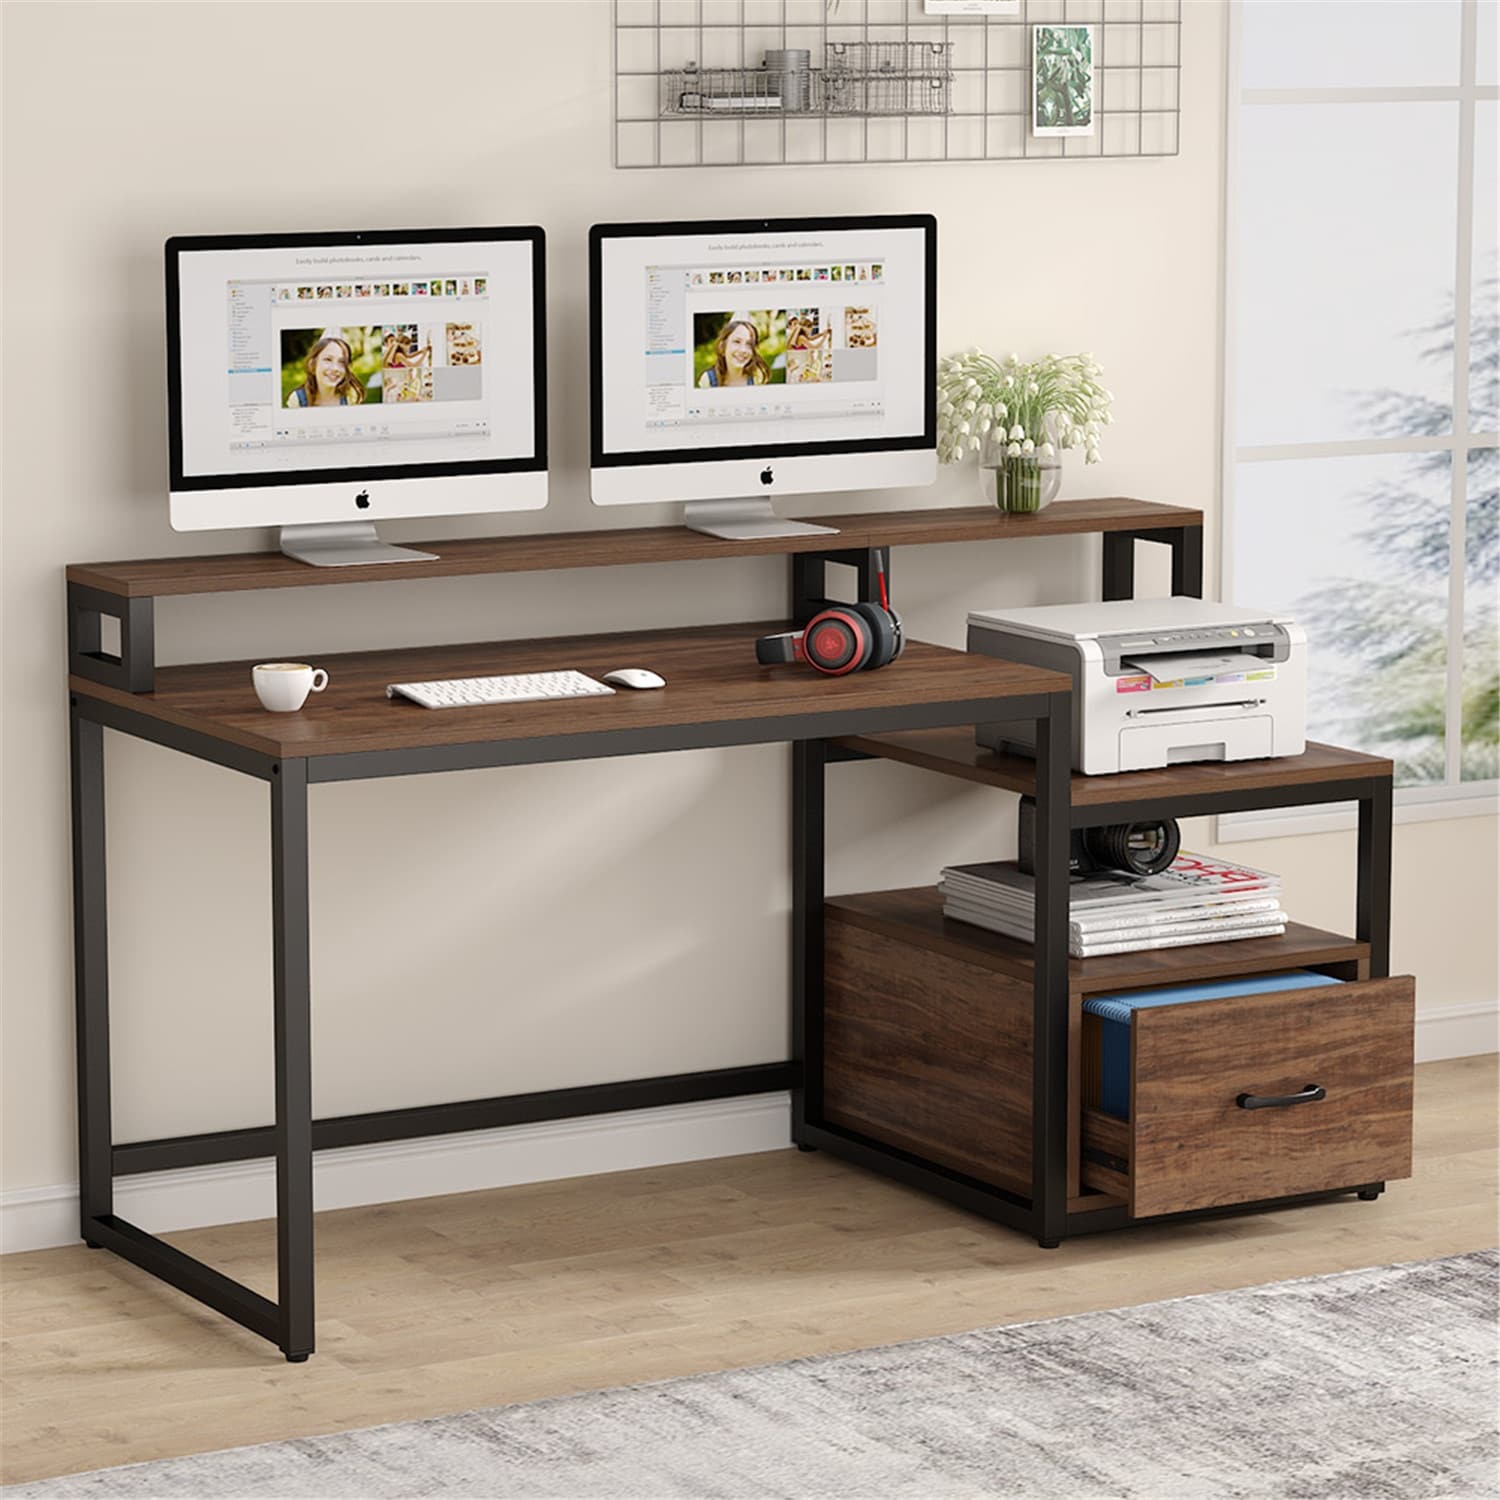 https://ak1.ostkcdn.com/images/products/is/images/direct/520b3966c7b23efeebf18596d96907c9a84cb92c/Computer-Desk-with-File-Drawer-and-Storage-Shelves.jpg